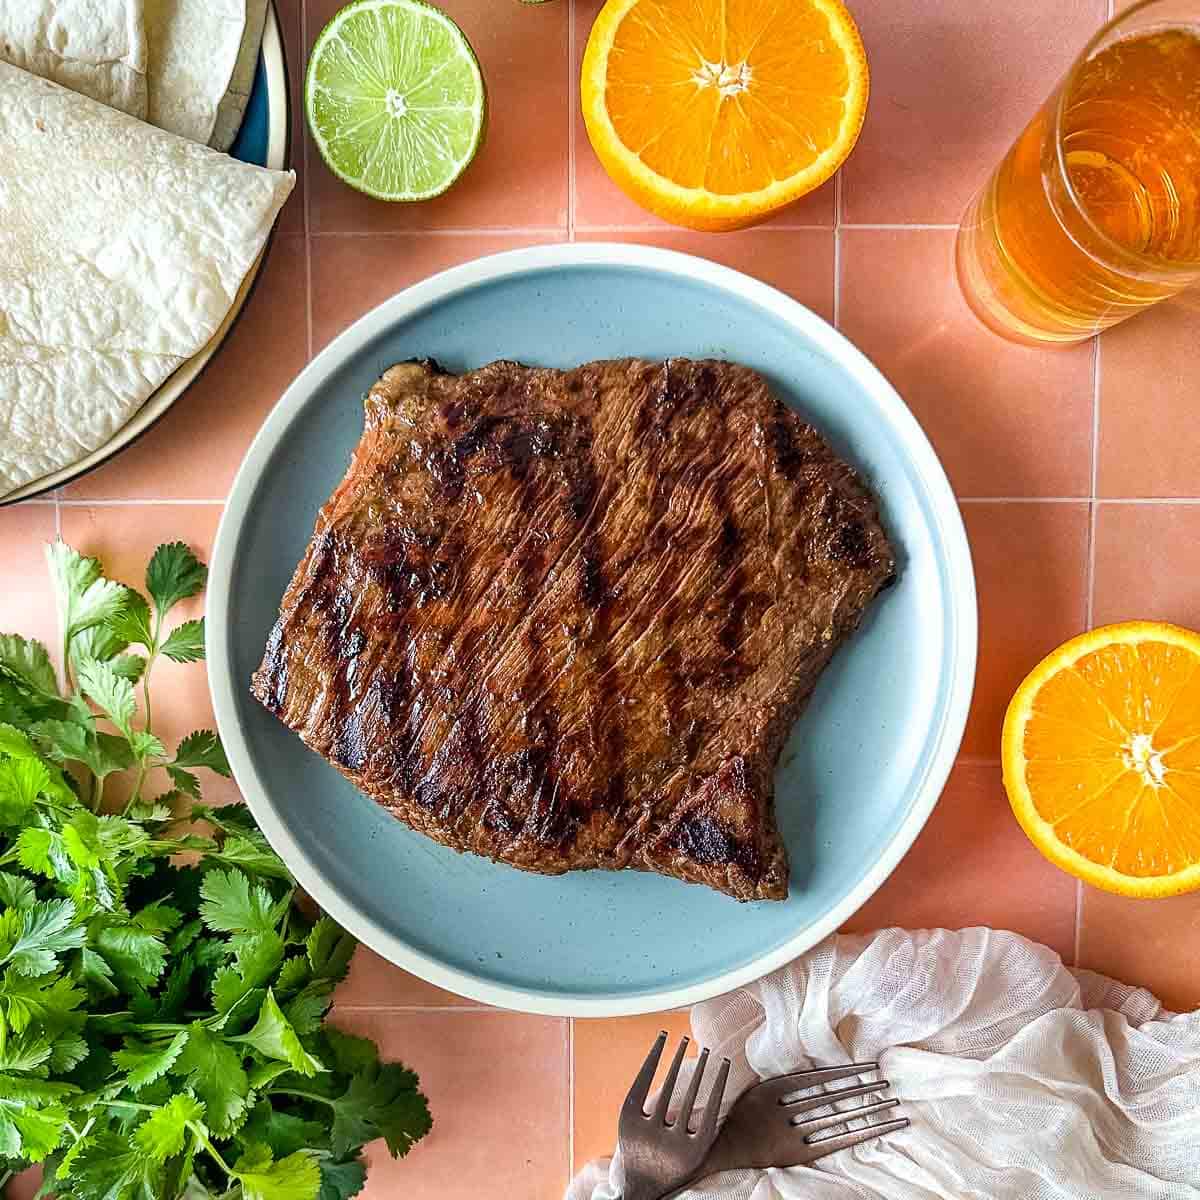 A grilled steak sits on a light blue plate surrounded by sliced oranges, limes, a bunch of cilantro, tortillas, and a glass of beer.